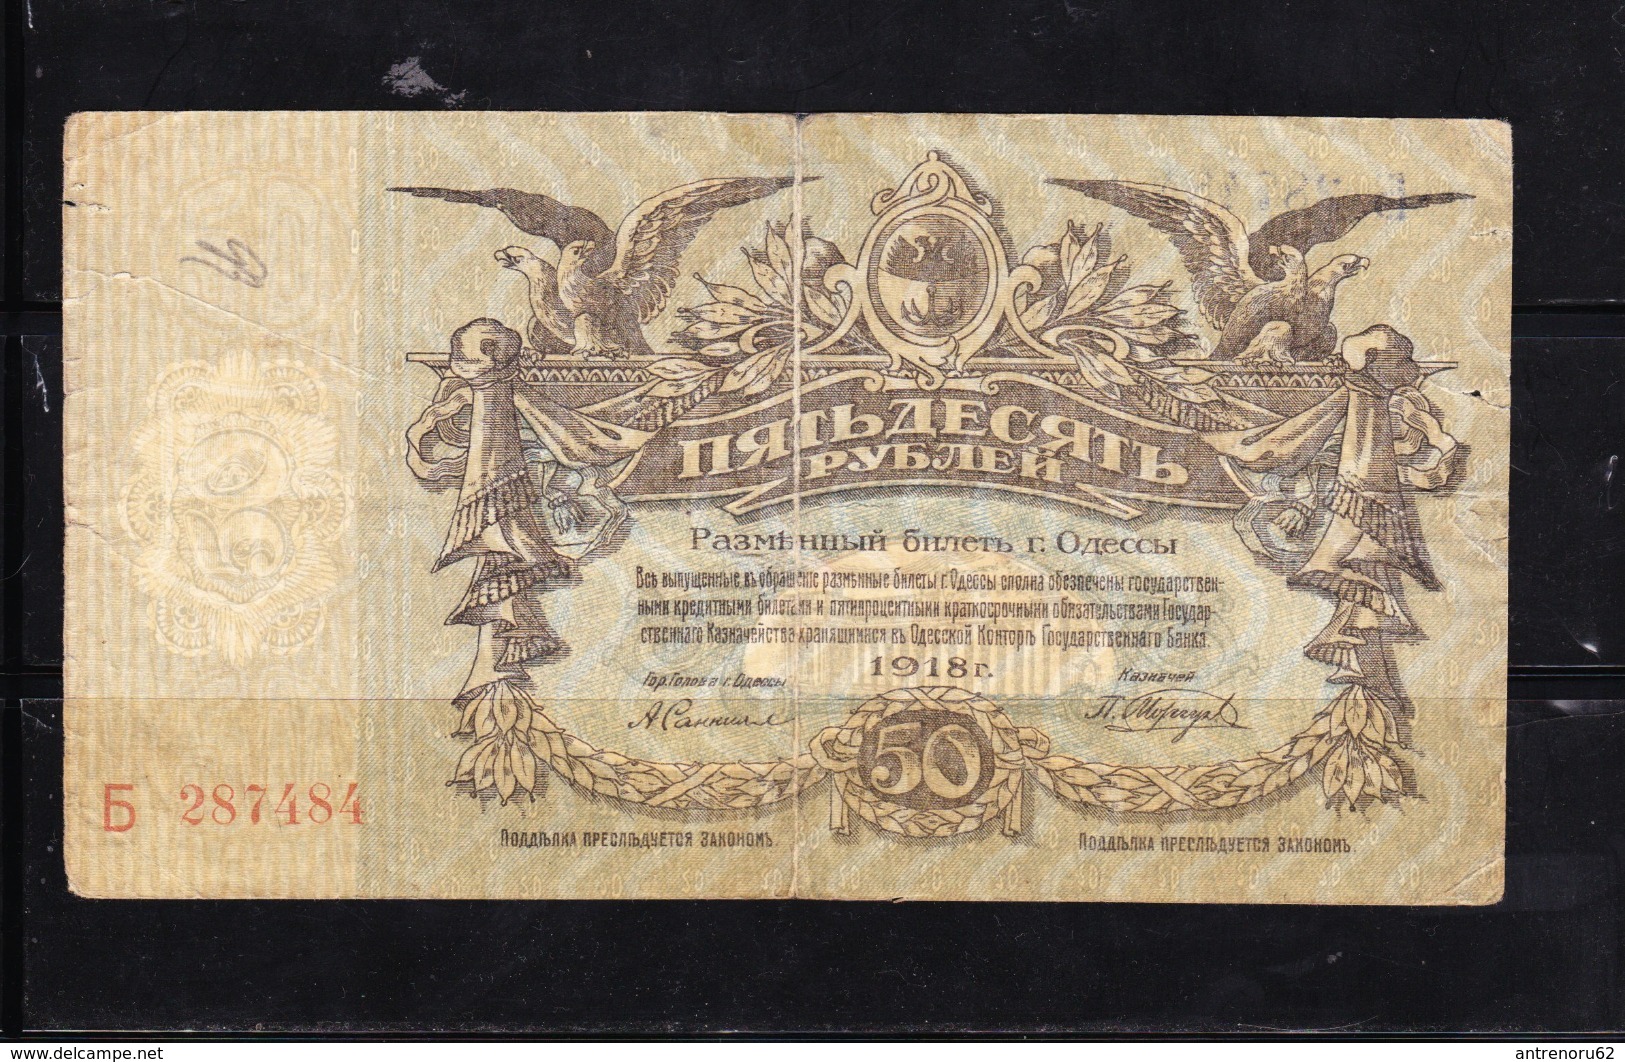 RUSSIA-UKRAINE&CRIMEA-50 RUBLES-1918-ODESSA-CITY-EXCHANGE NOTE-ORIGINAL-BANKNOTES-CIRCULATED-SEE-SCAN-CATALOG-#S338 - Russie